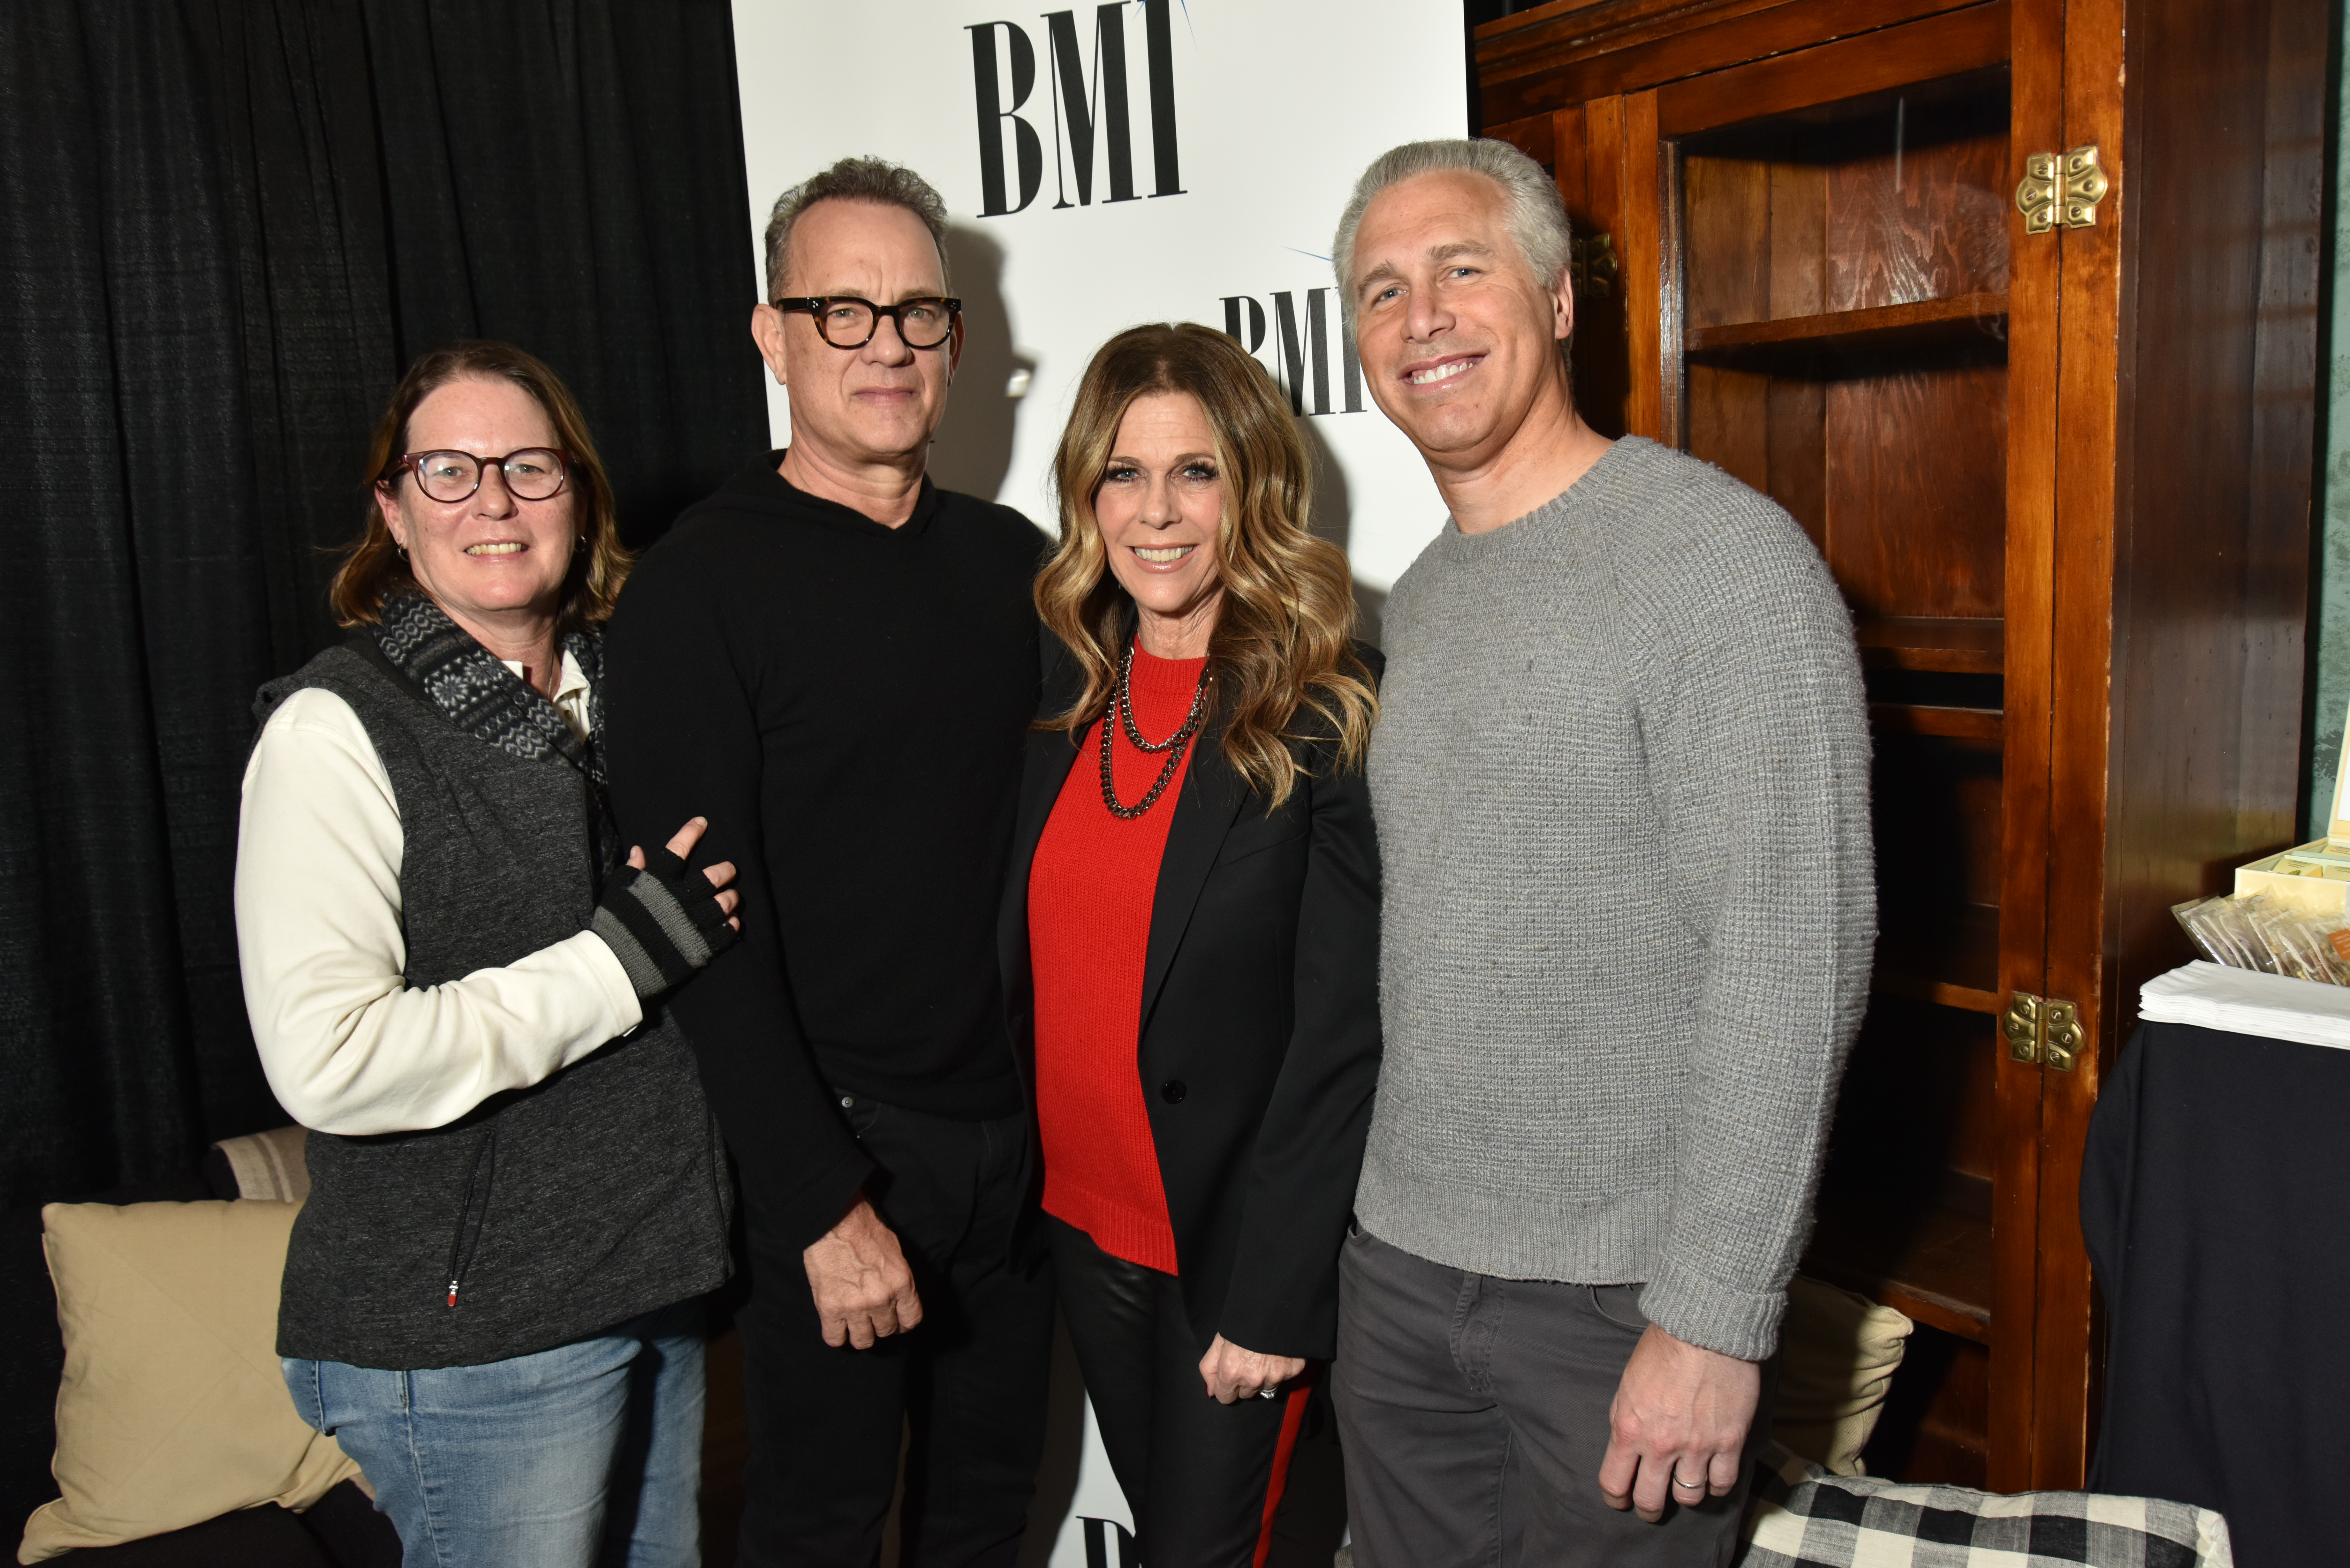 Pictured (L-R): BMI Executive Vice President, Distribution, Publisher Relations & Administration Services Alison Smith, Oscar Award-Winning Actor Tom Hanks, Actress, producer, singer and writer Rita Wilson and BMI Executive Vice President, Creative & Licensing Mike Steinberg pictured backstage at the BMI Snowball during the 2018 Sundance Film Festival at The Shop on January 23, 2018 in Park City, Utah.        